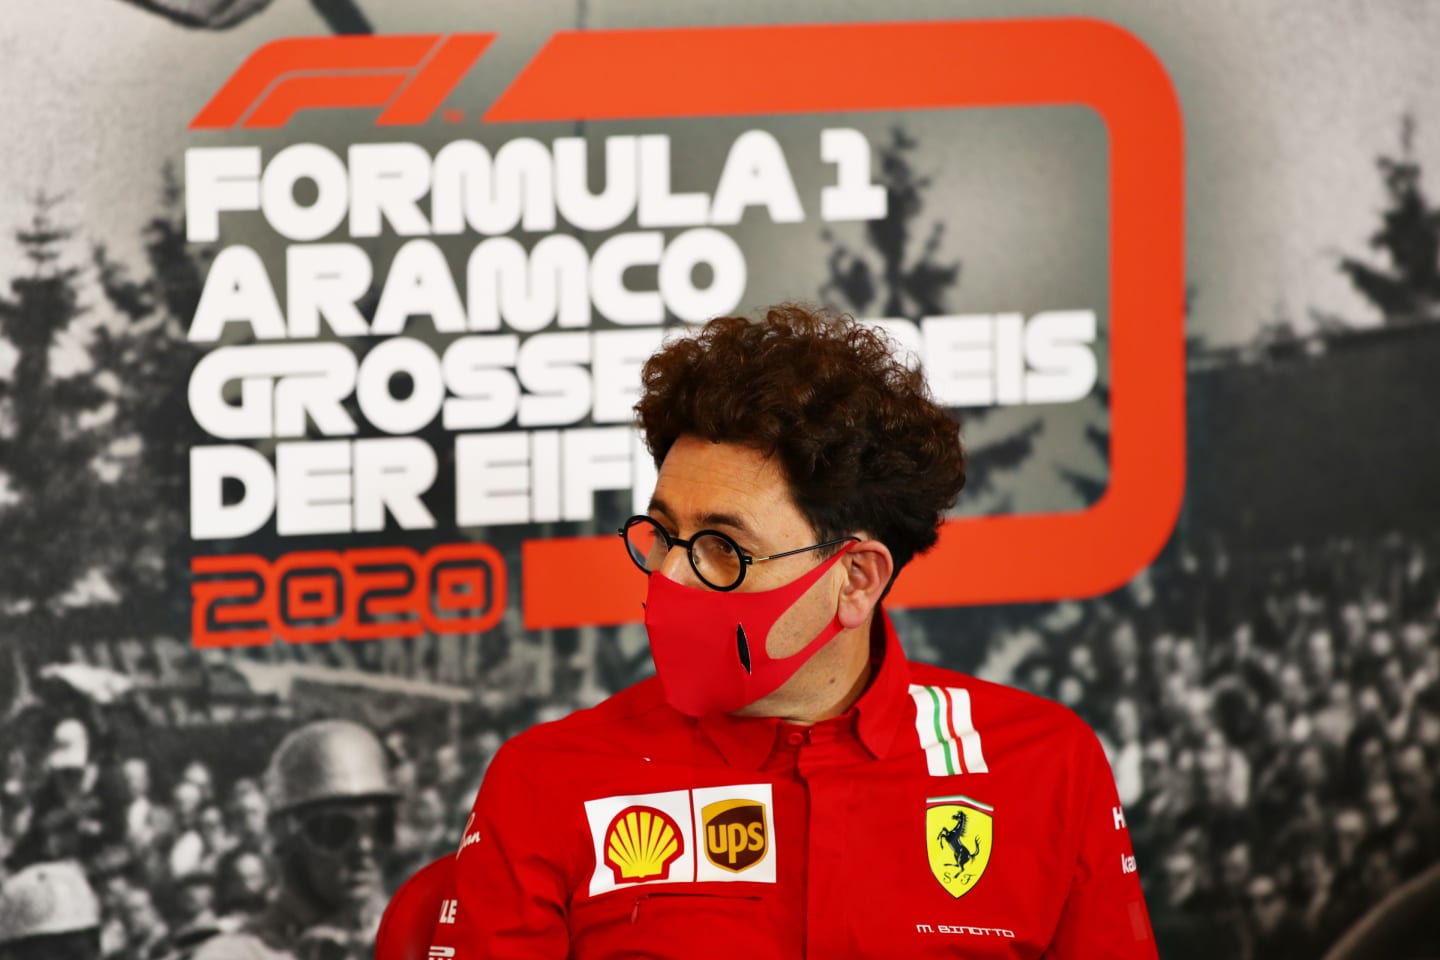 NUERBURG, GERMANY - OCTOBER 09: Scuderia Ferrari Team Principal Mattia Binotto talks in the Team Principals Press Conference during practice ahead of the F1 Eifel Grand Prix at Nuerburgring on October 09, 2020 in Nuerburg, Germany. (Photo by Joe Portlock/Getty Images)